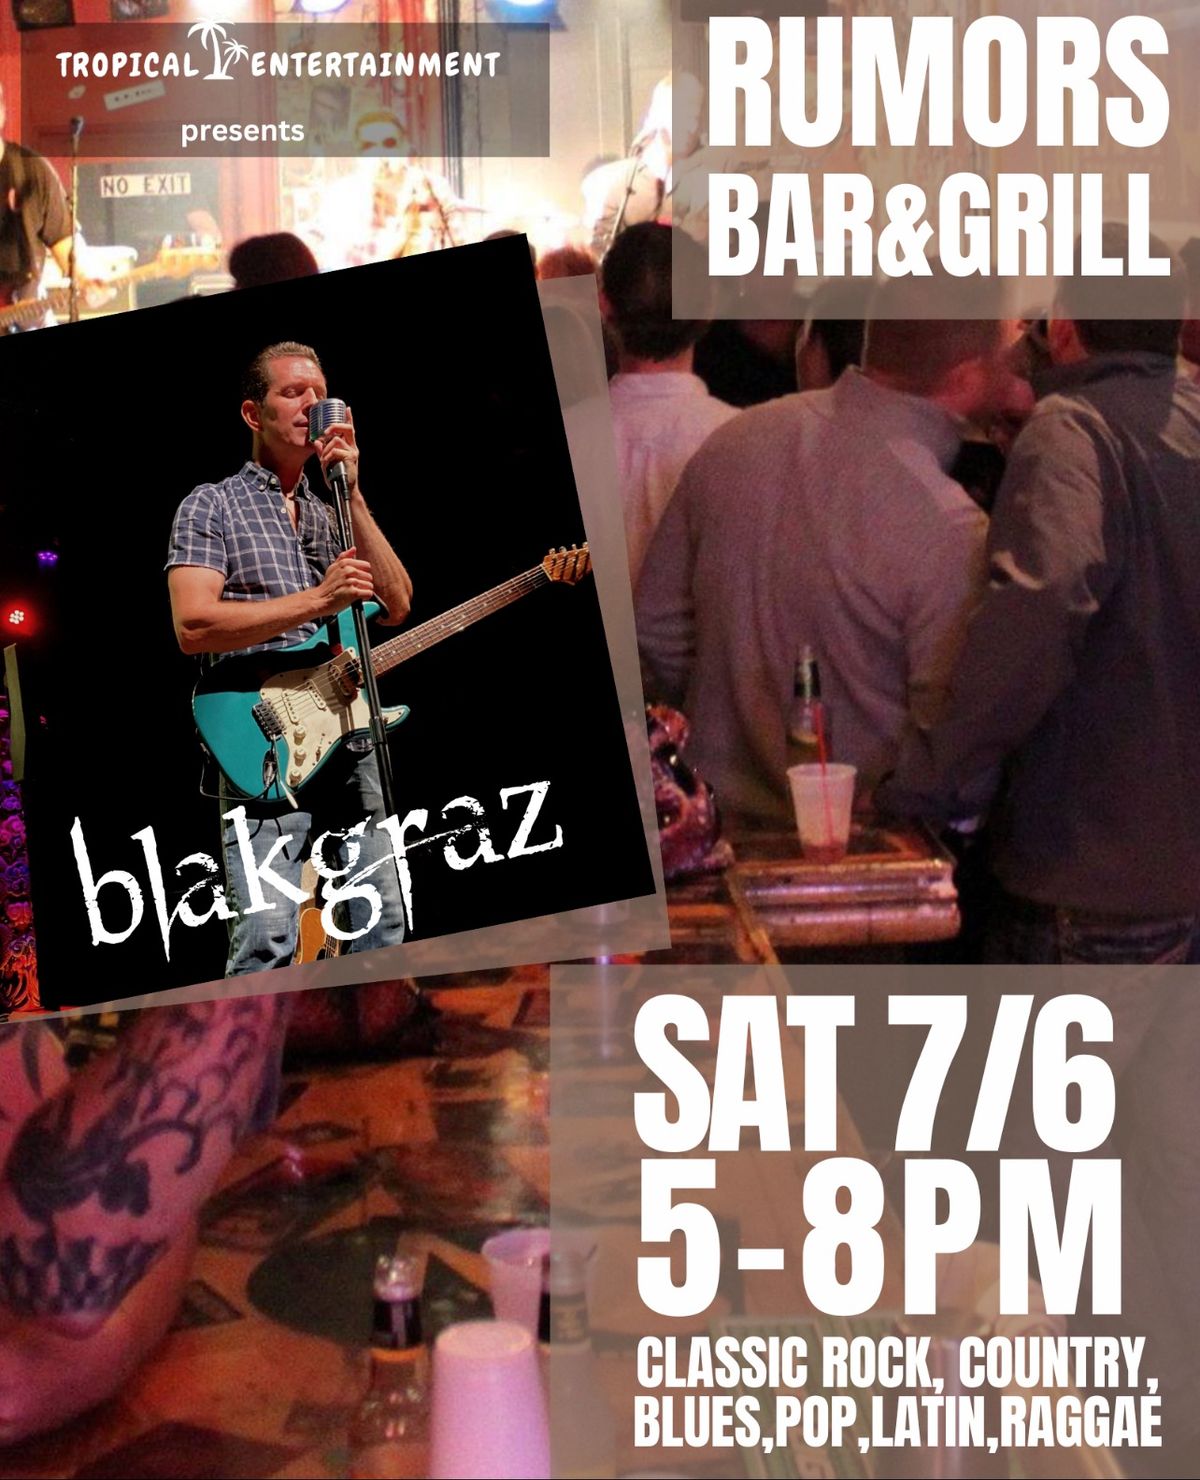 Join us for some amazing music by blakgraz!